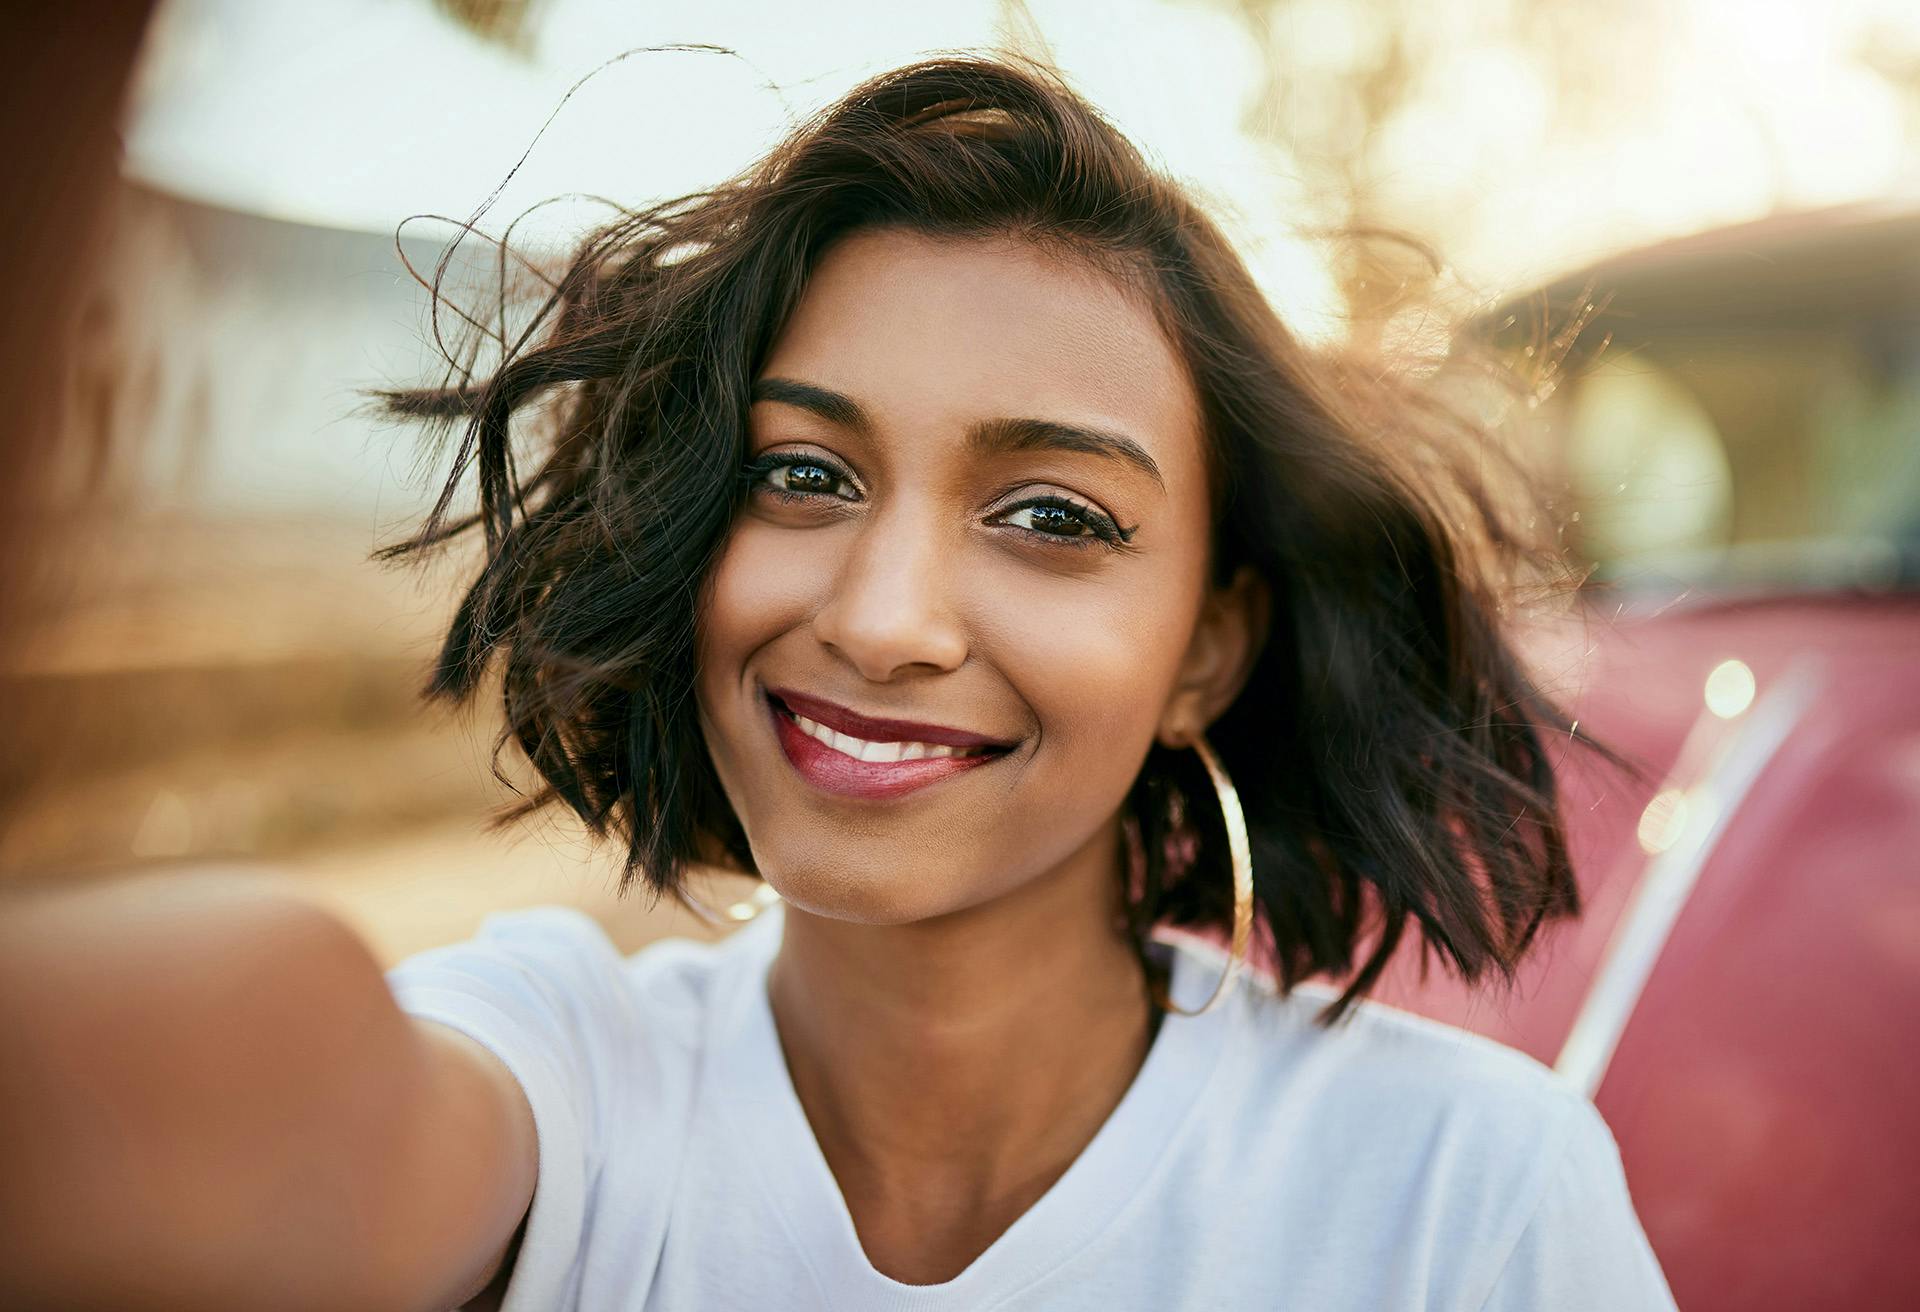 Selfie of a Woman with Short Hair in Front of a Red Car